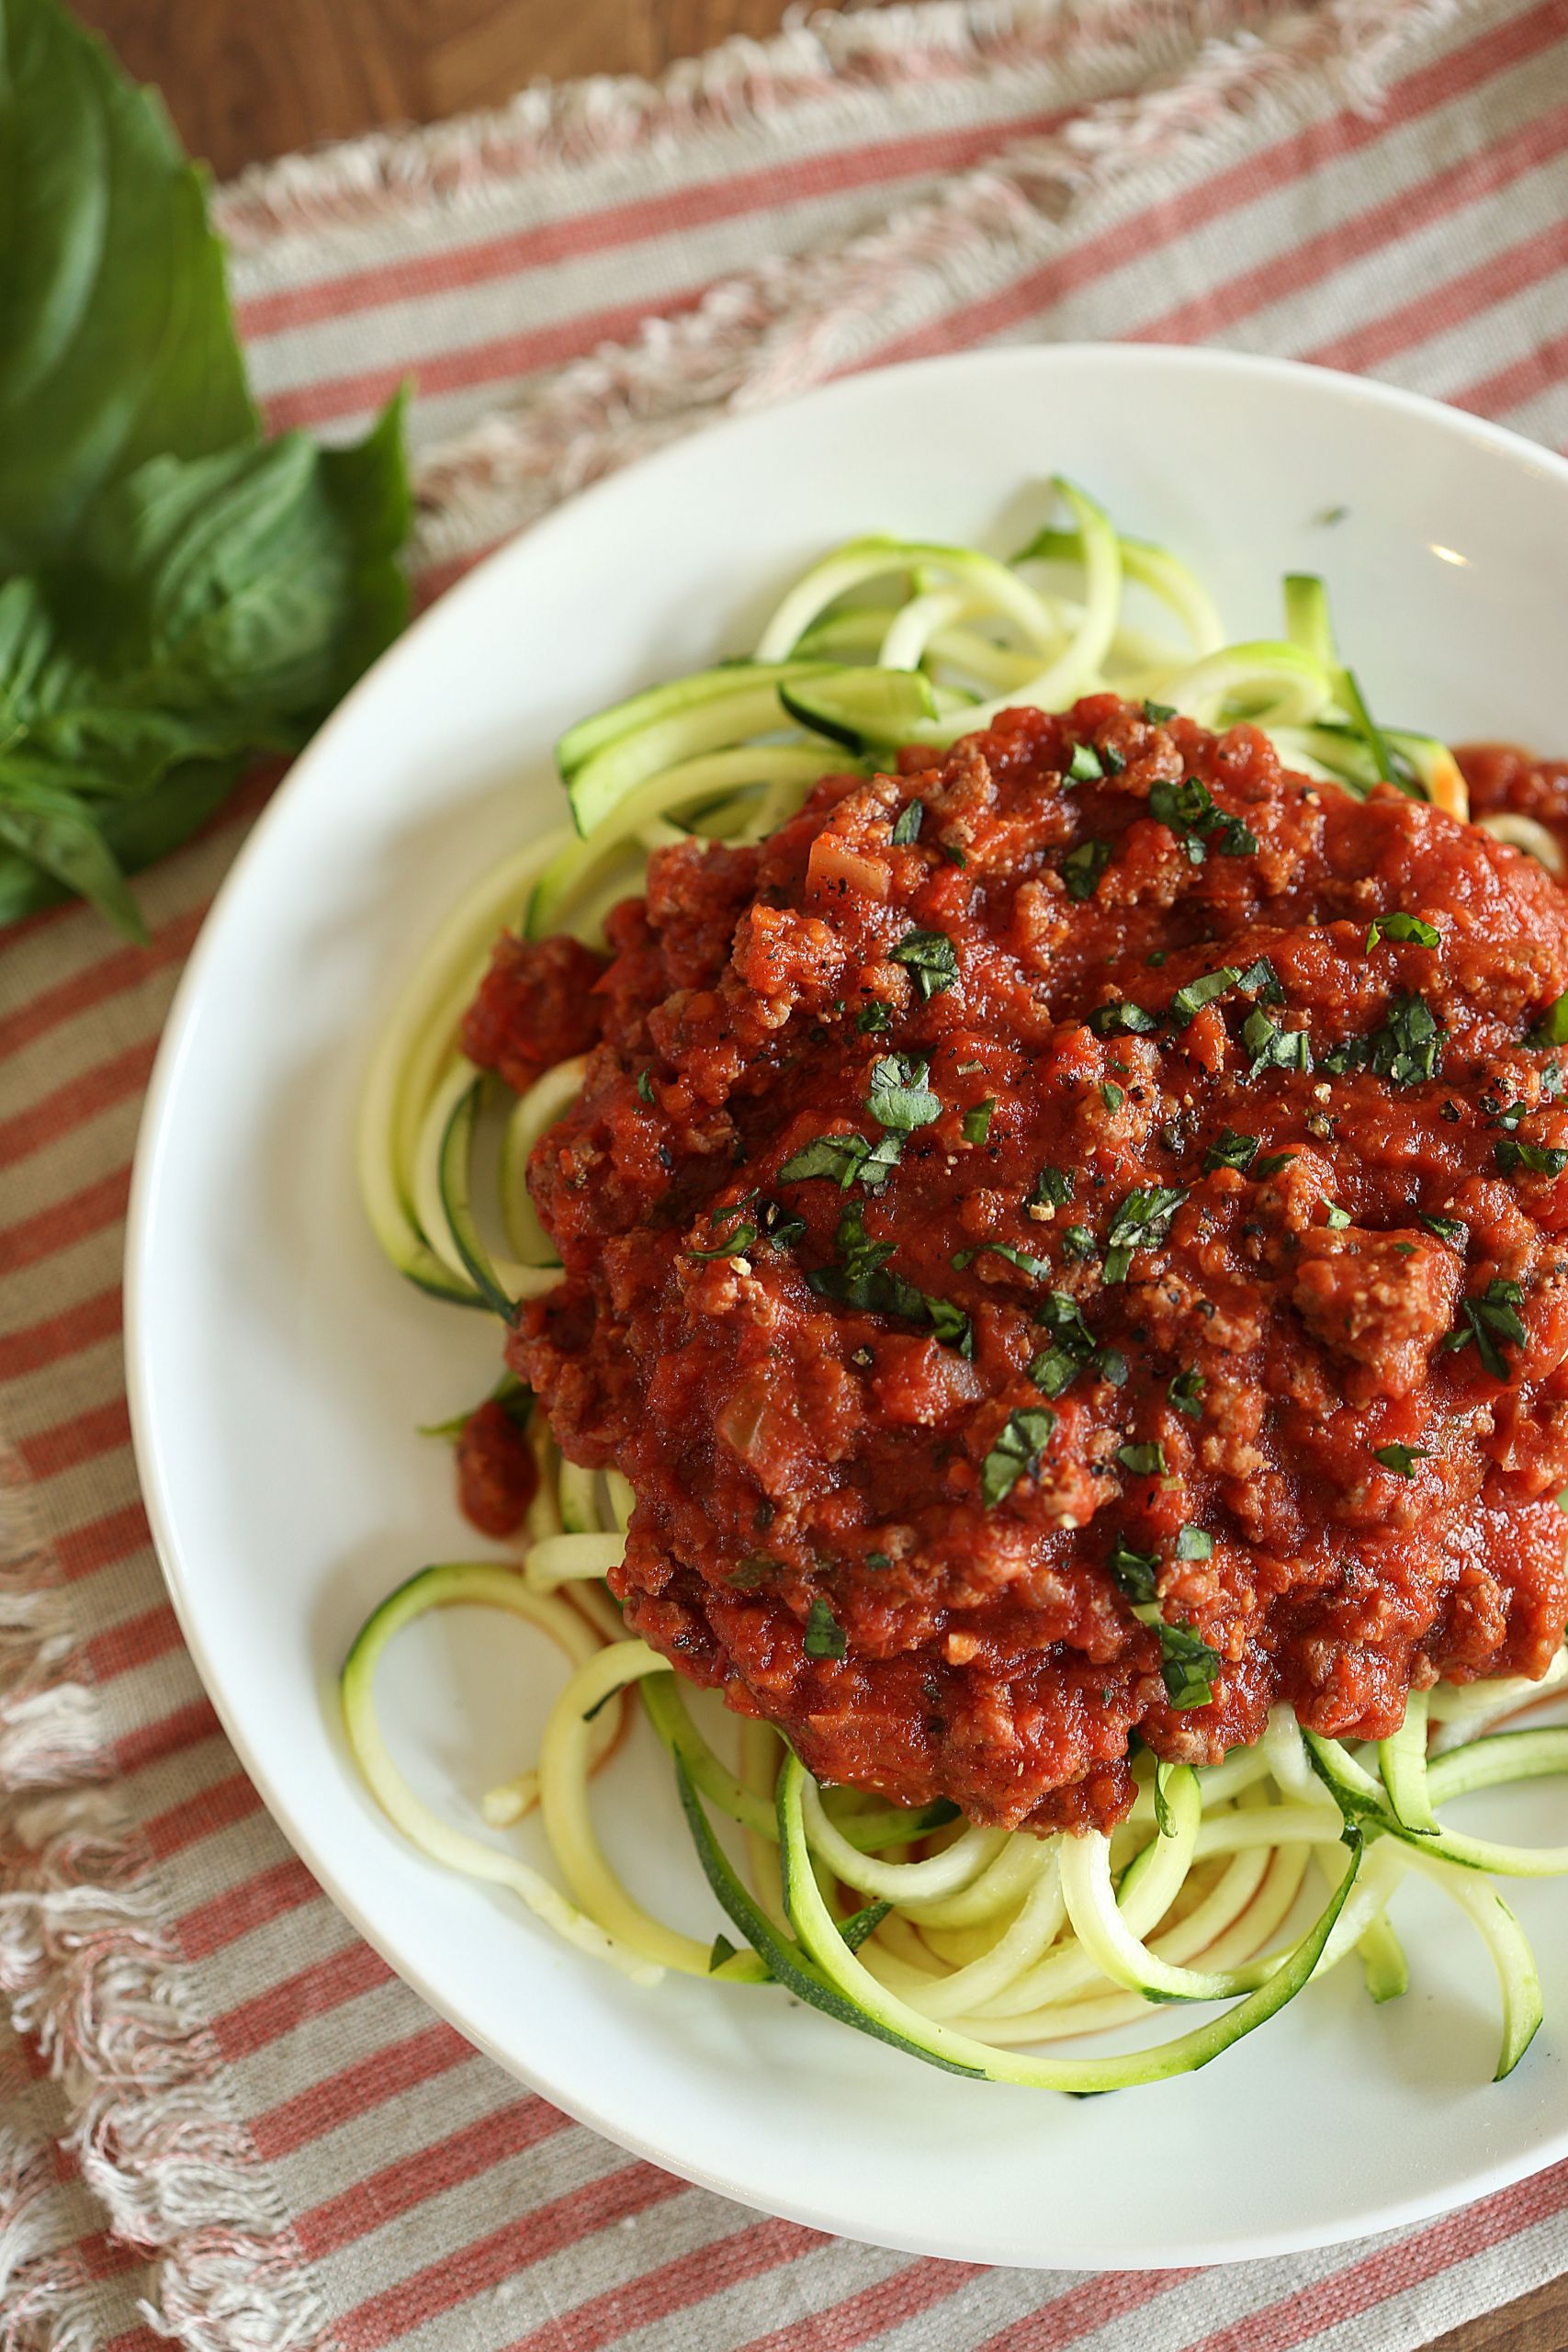 Zucchini Noodles Recipes
 Zucchini Noodles with Simple Bolognese Sauce Eat